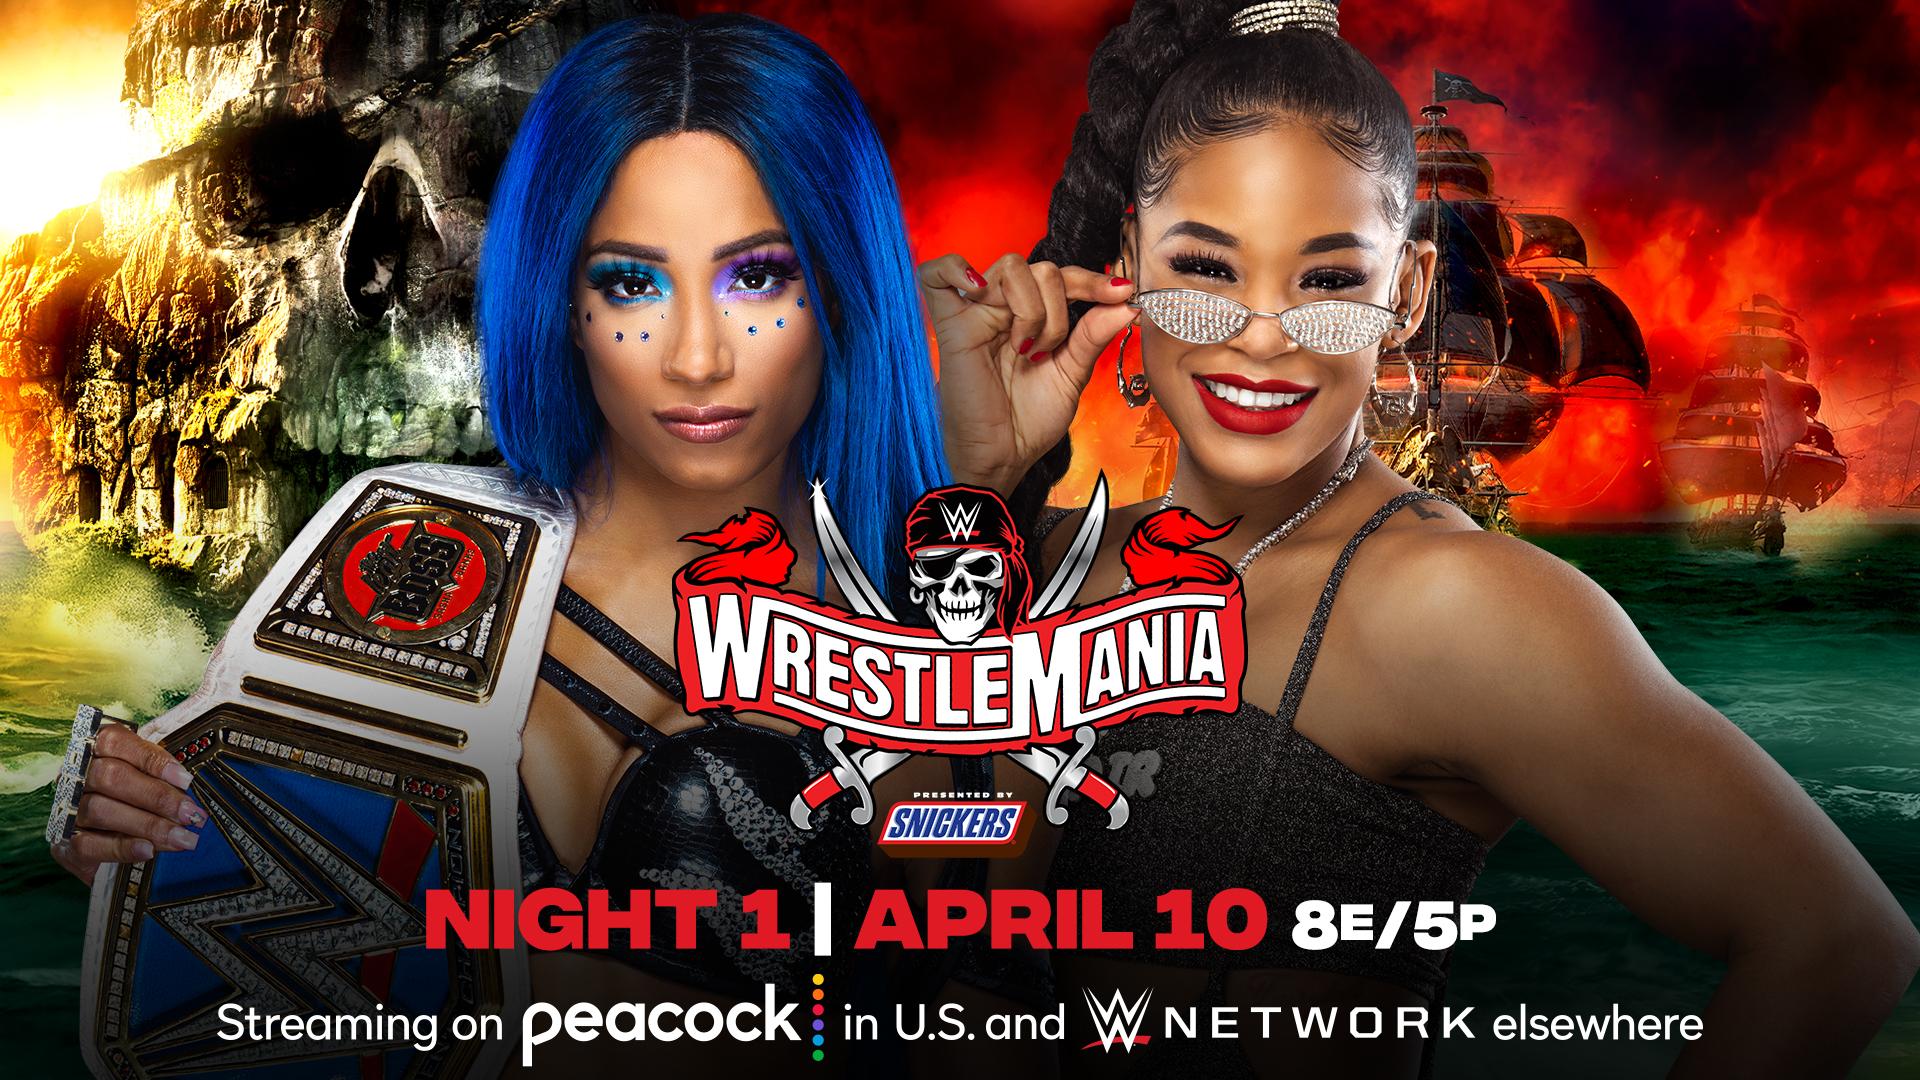 WWE WrestleMania 37 Night 1 Results For April 10, 2021